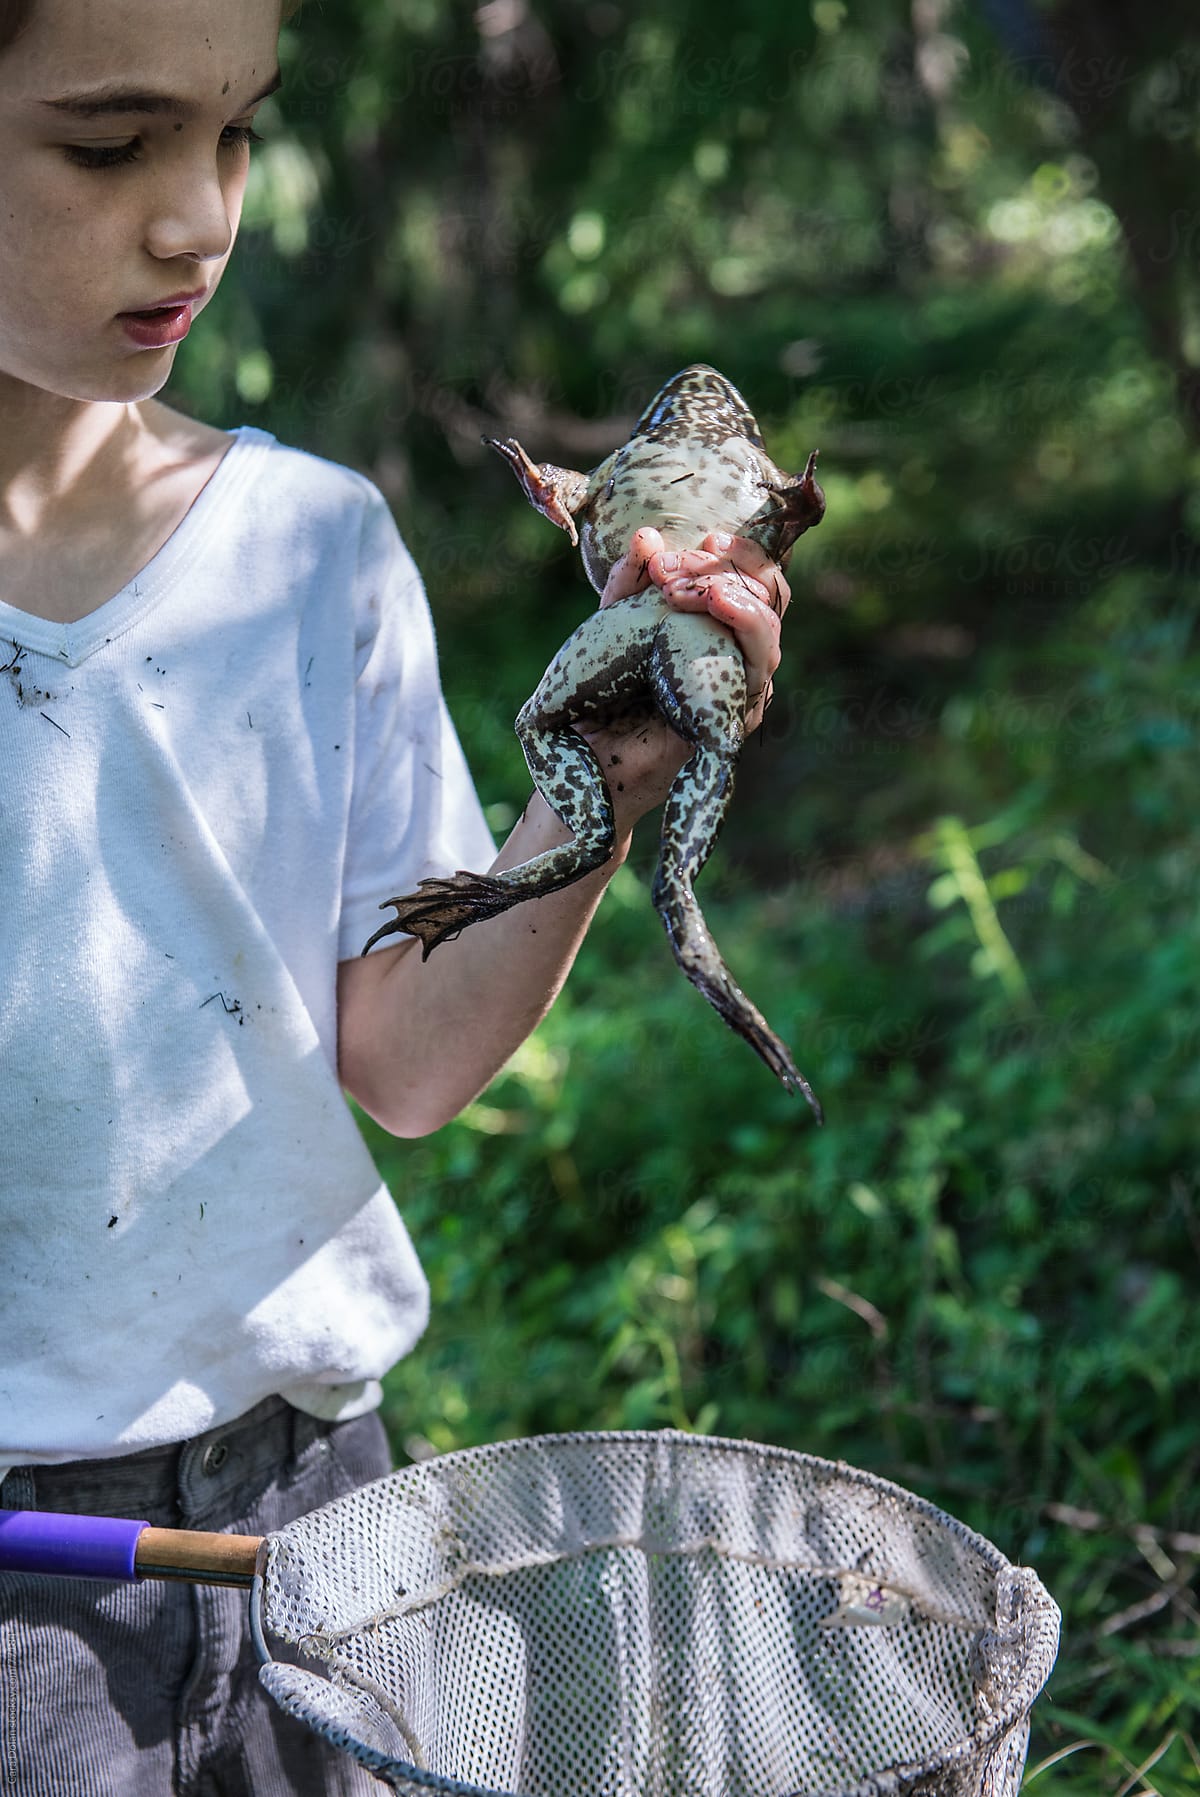 Boy With Net Holds A Large Bullfrog He Has Just Caught by Stocksy  Contributor Cara Dolan - Stocksy